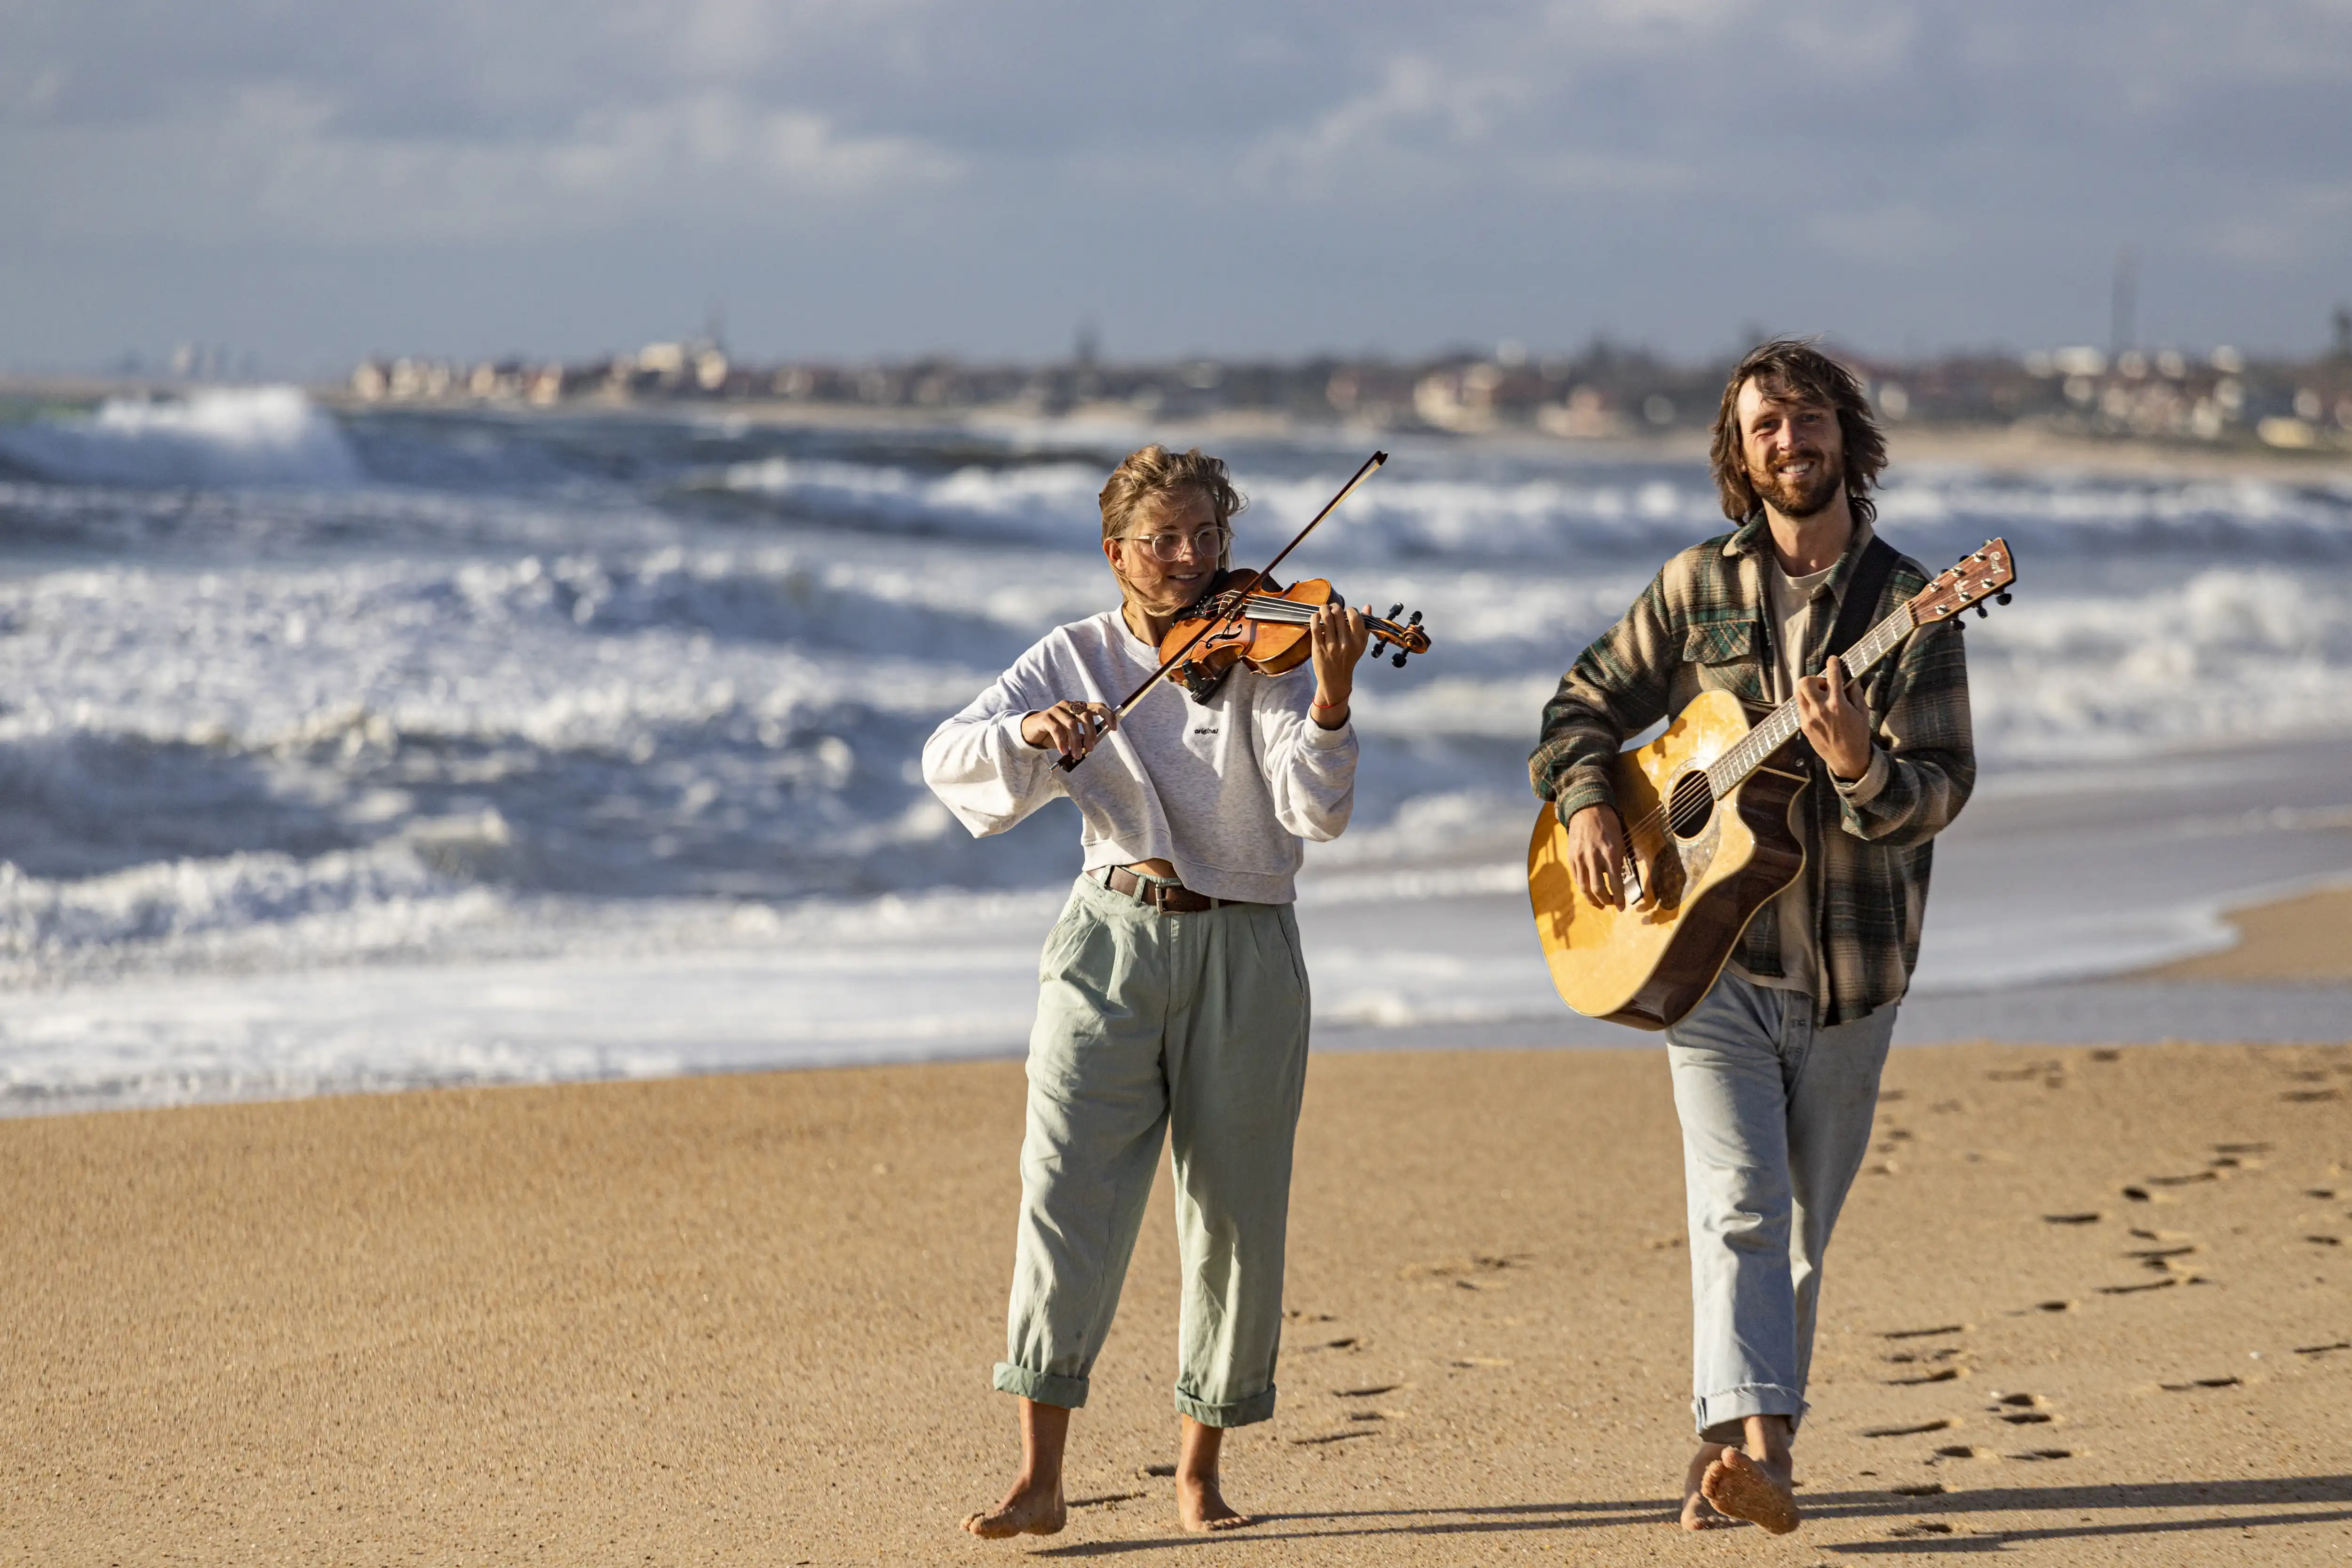 Anka and René are walking on the beach
      playing violin and guitar. The sun is shining and white waves are breaking in the background.